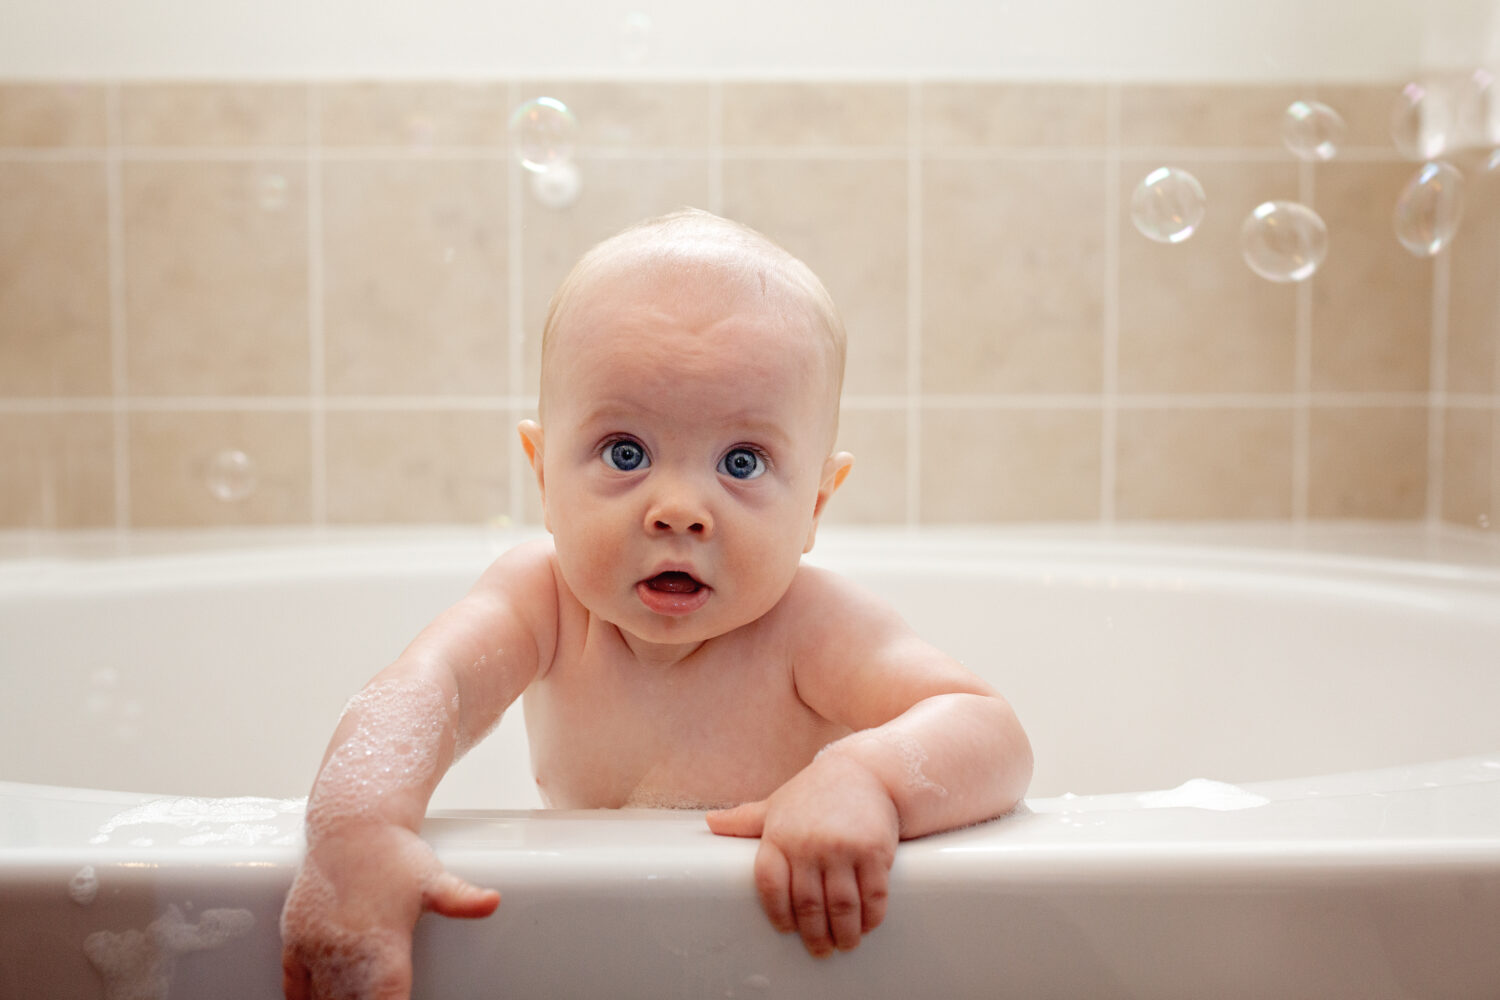 Baby leaning over the bathtub and holding on